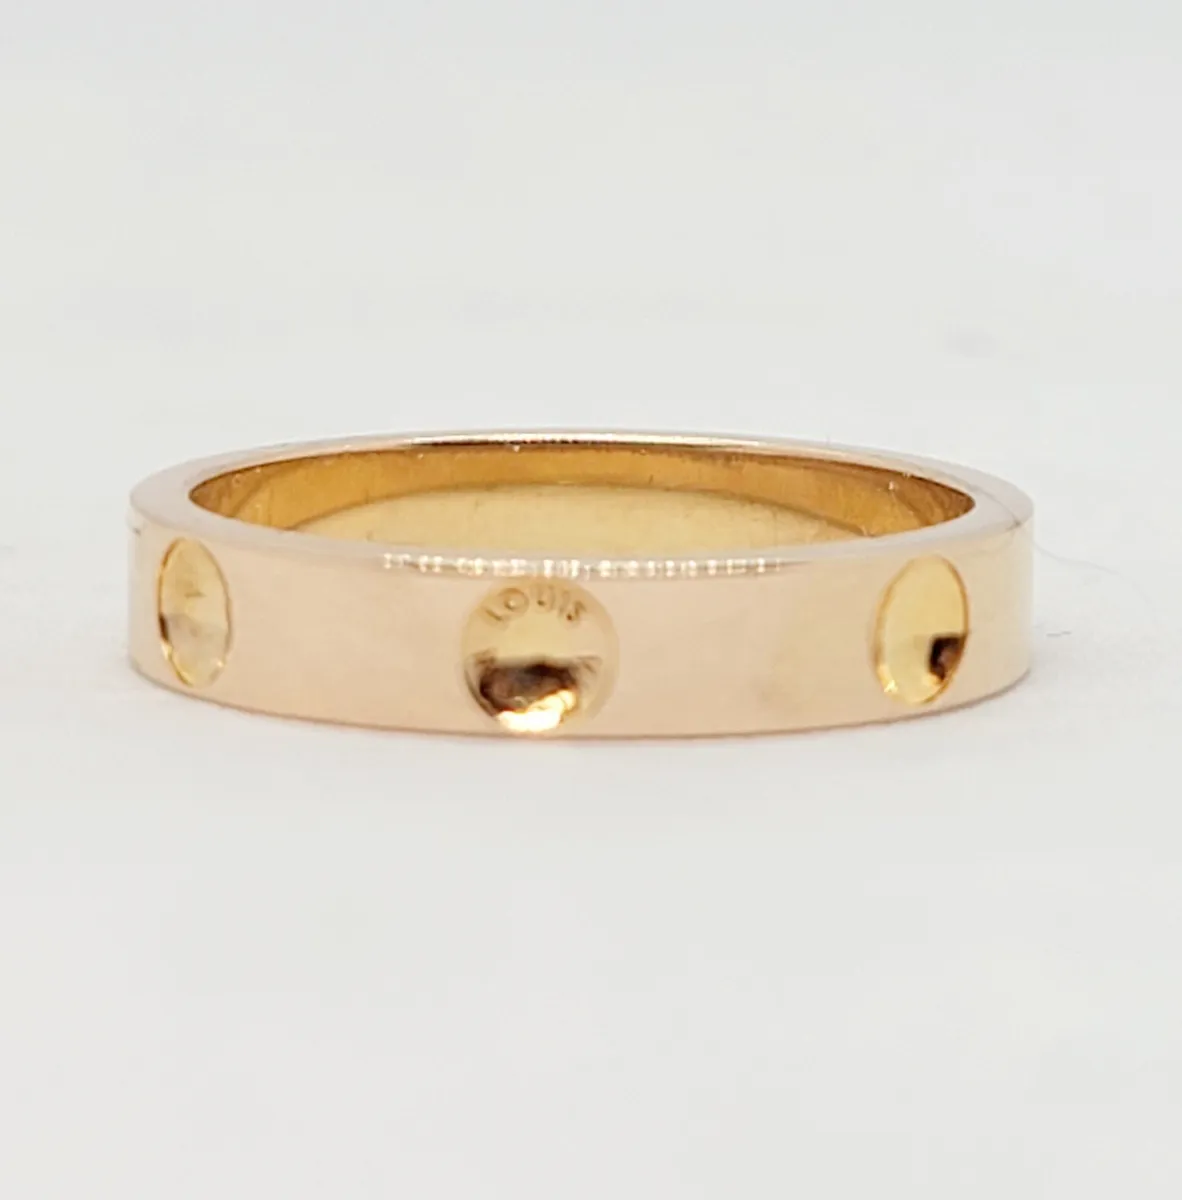 Empreinte Ring, Yellow Gold And Diamonds - Jewelry - Categories